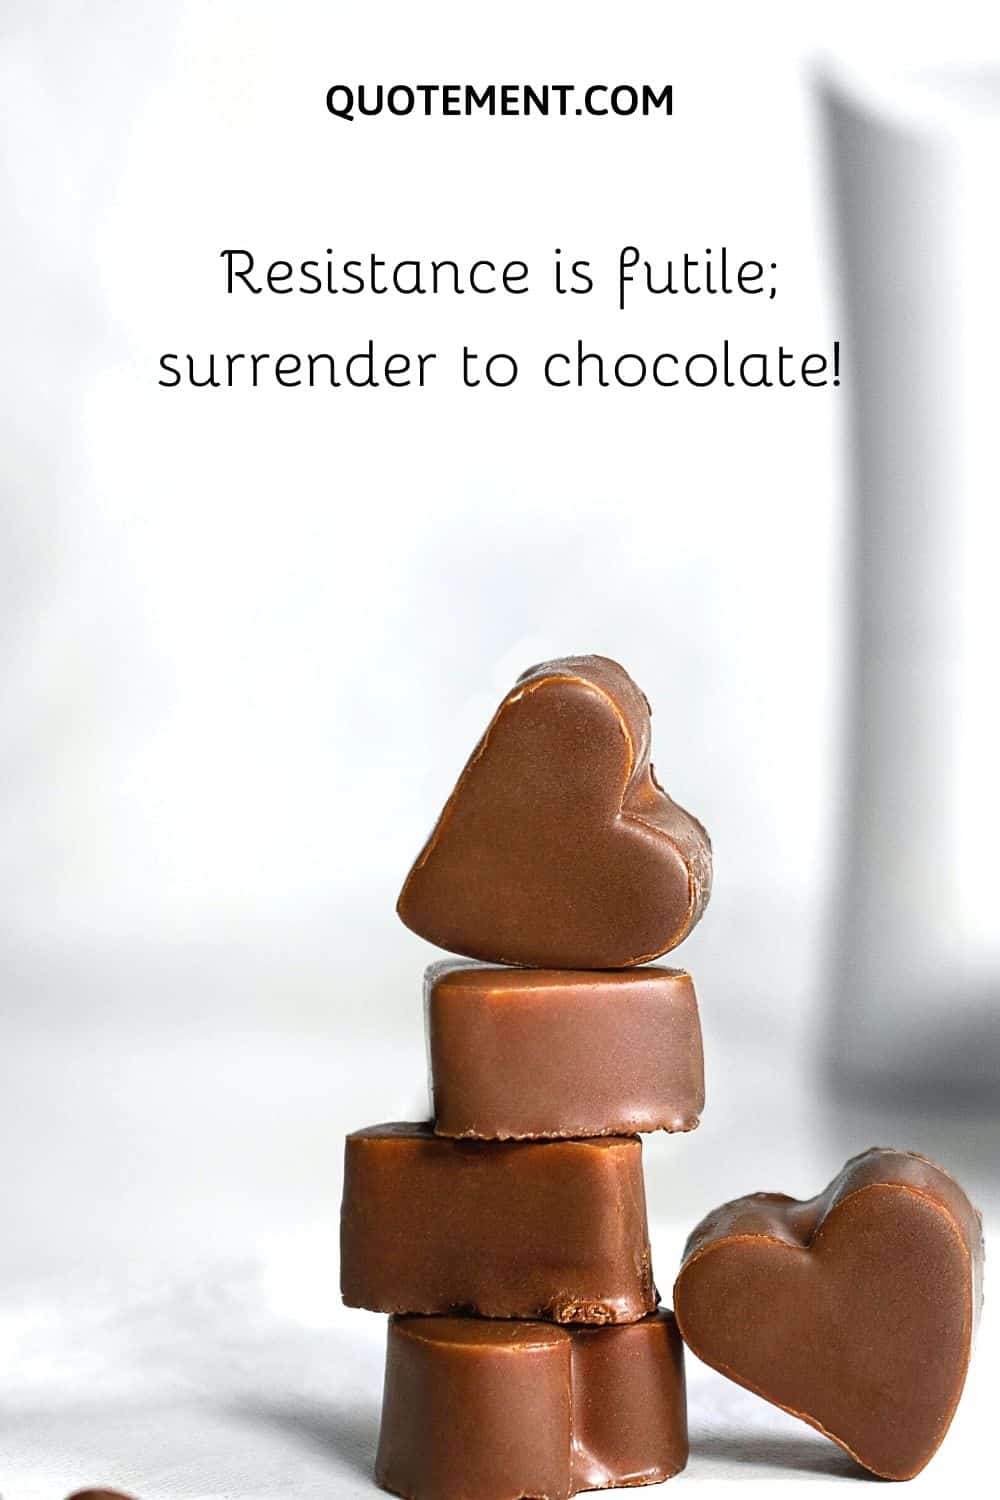 Resistance is futile; surrender to chocolate!